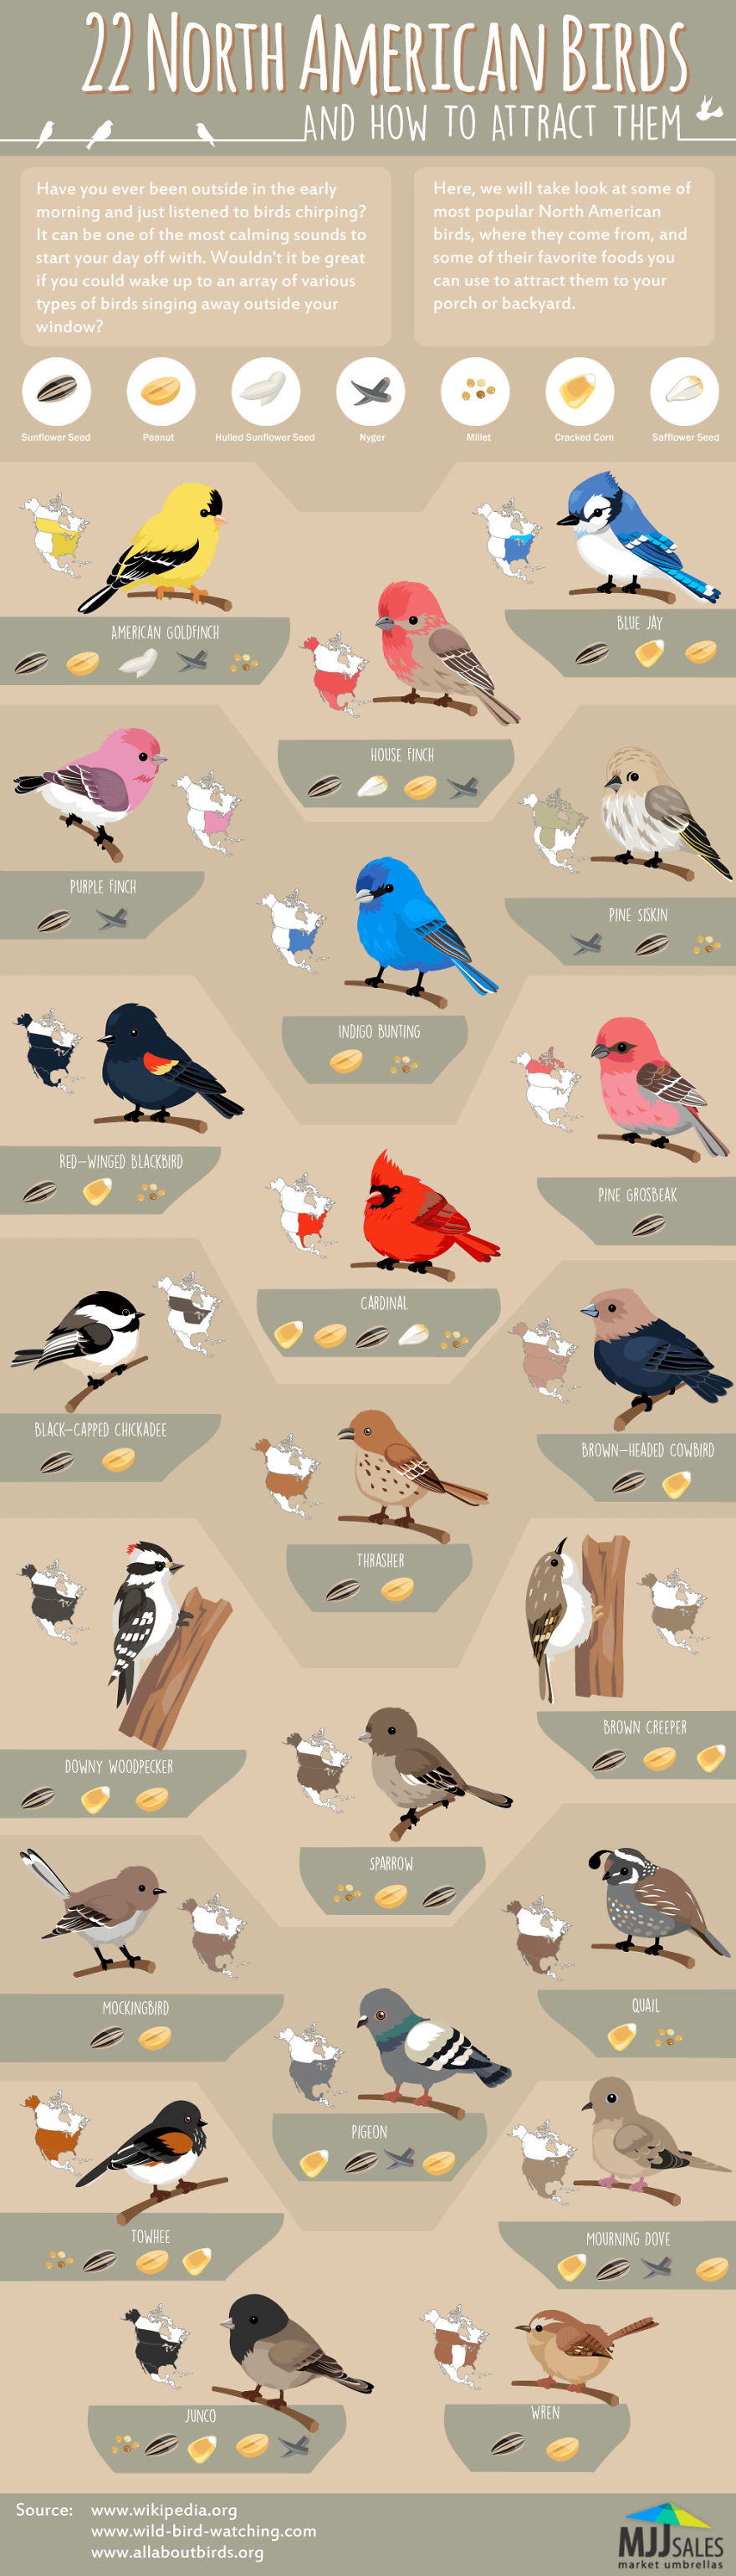 Found This Cool Chart Of North American Birds